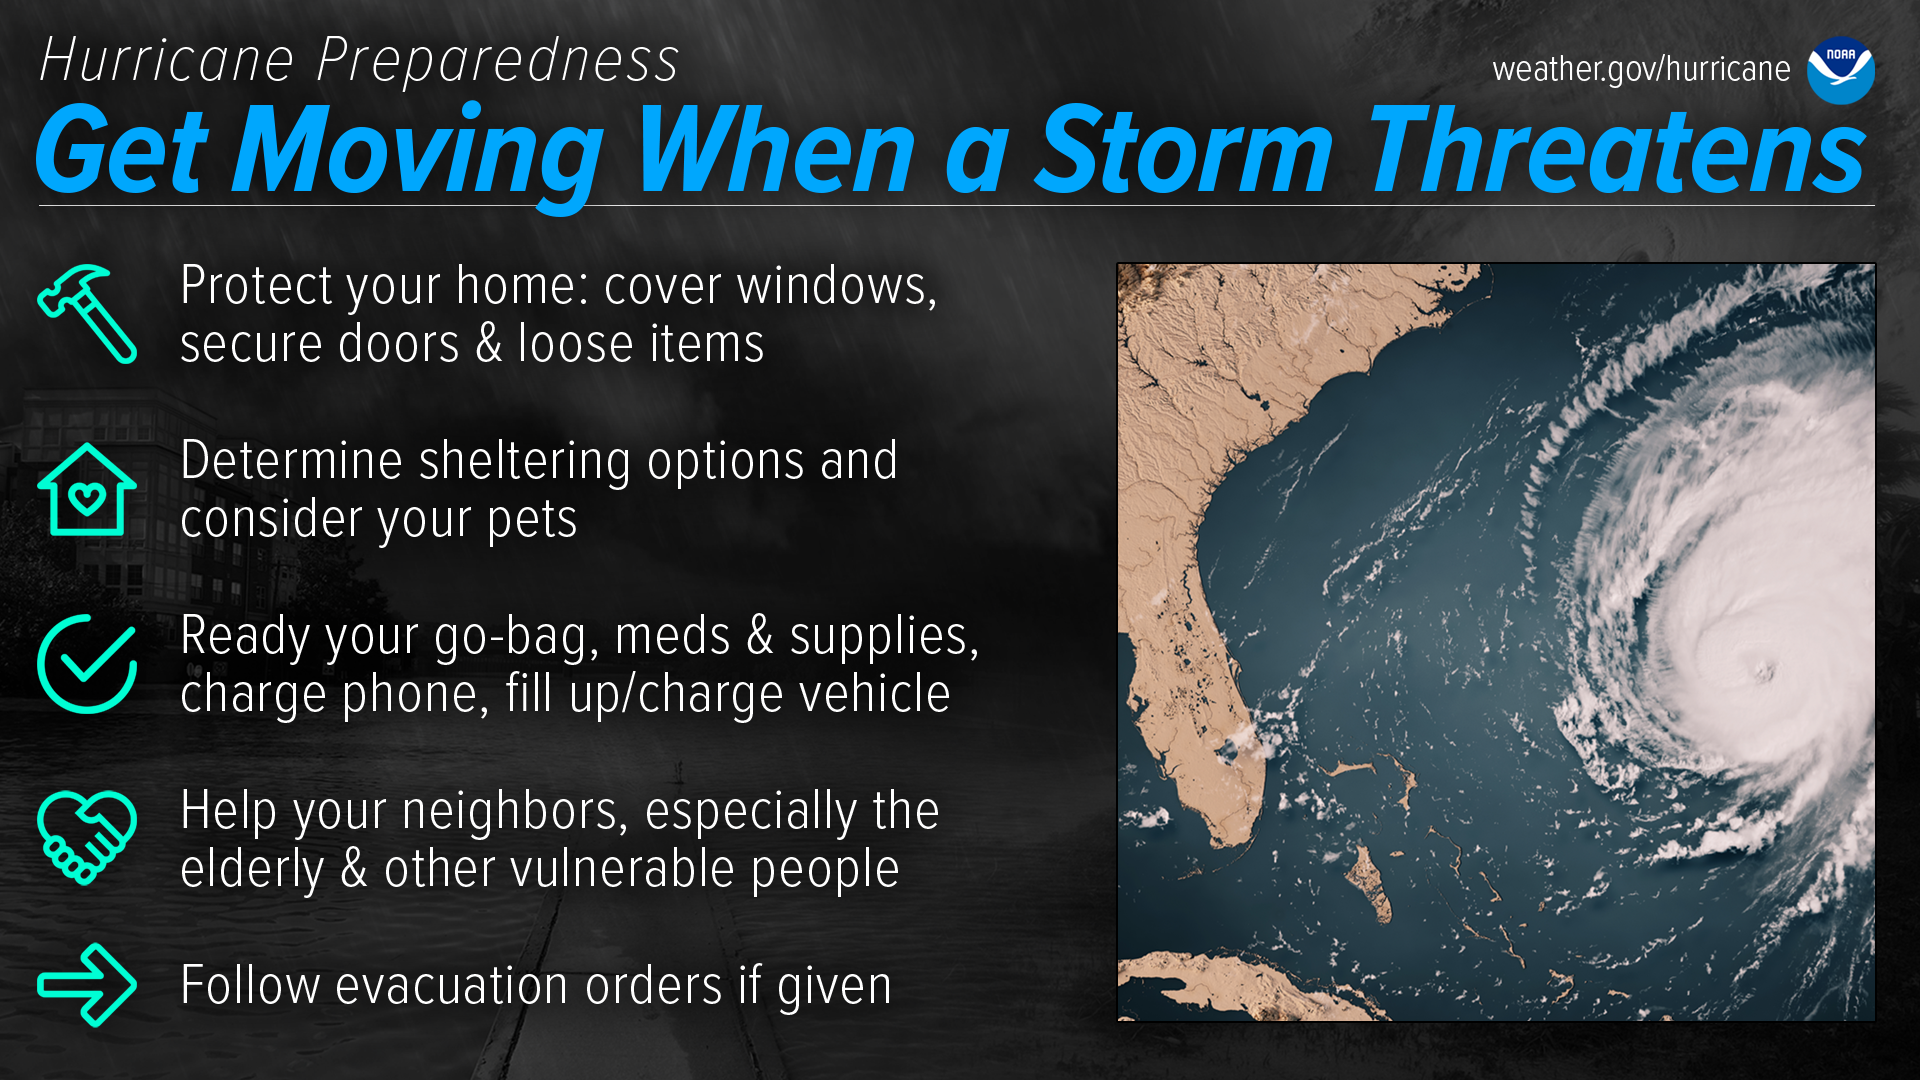 Hurricane Preparedness - Get moving when a storm threatens. Protect your home: cover windows, secure doors & loose items. Determine sheltering options and consider your pets. Ready your go-bag, meds & supplies, charge phone, fill up/charge vehicle. Help your neighbors, especially the elderly & other vulnerable people. Follow evacuation orders if given.